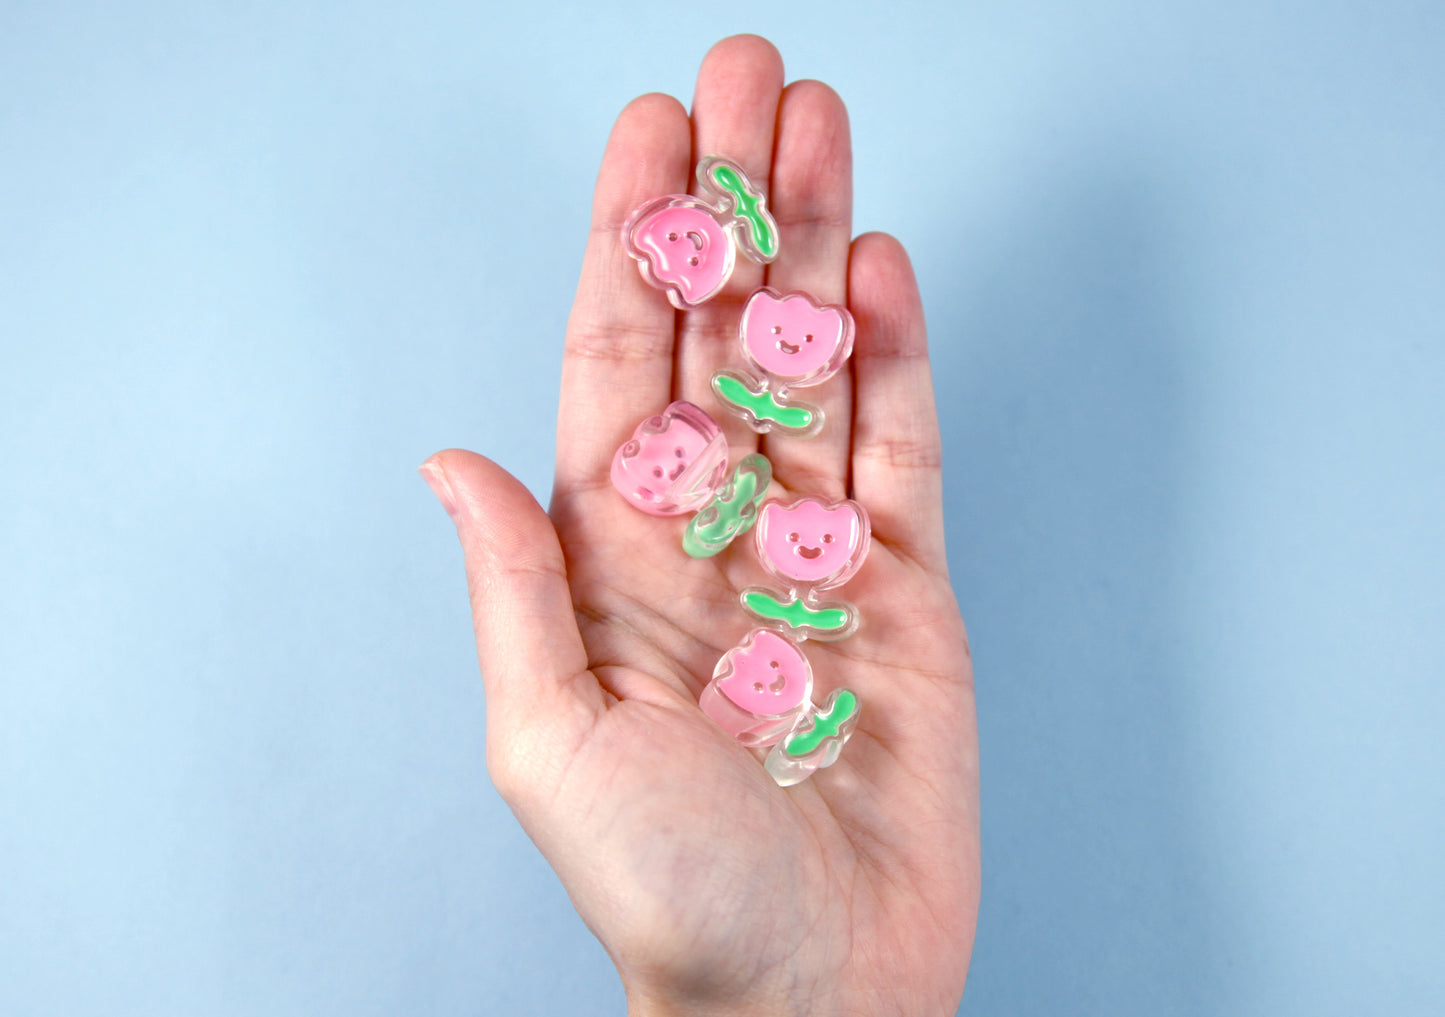 Flower Beads - 25mm Cute Happy Tulip Enamel Style Acrylic Beads or Resin Beads - 10 pc set